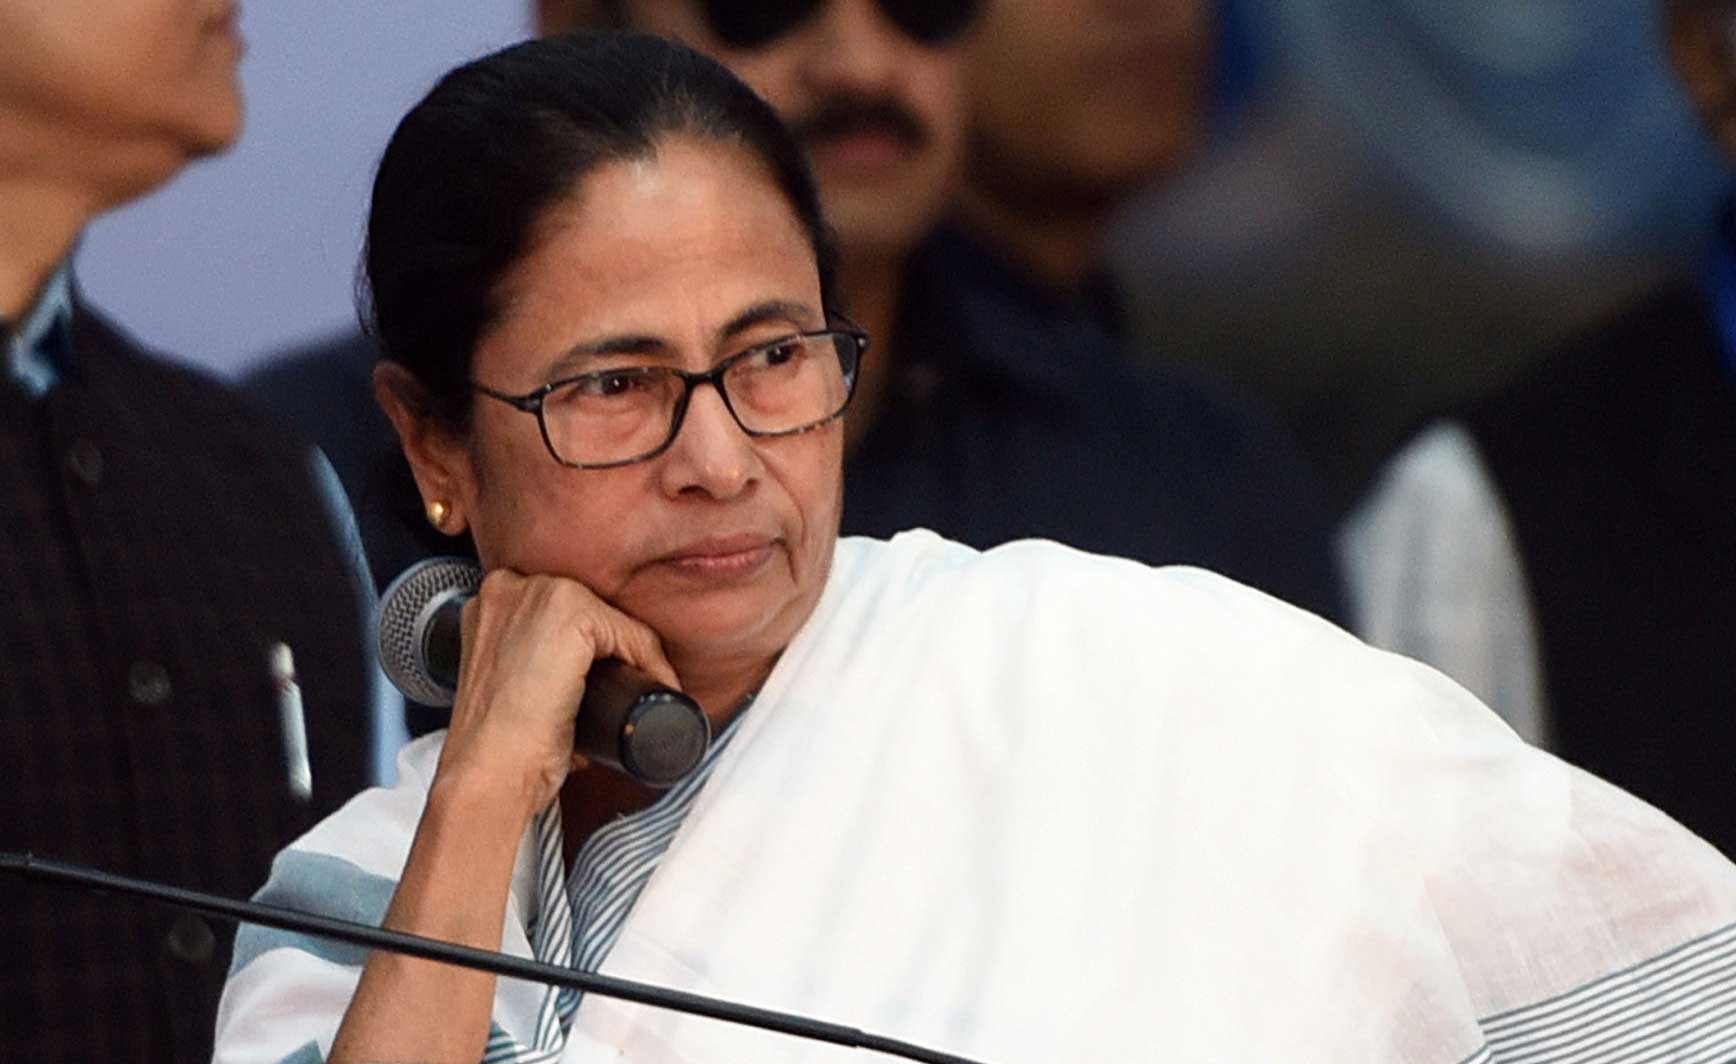 Mamata Banerjee stressed the need for “a permanent solution” to the Gorkha statehood problem